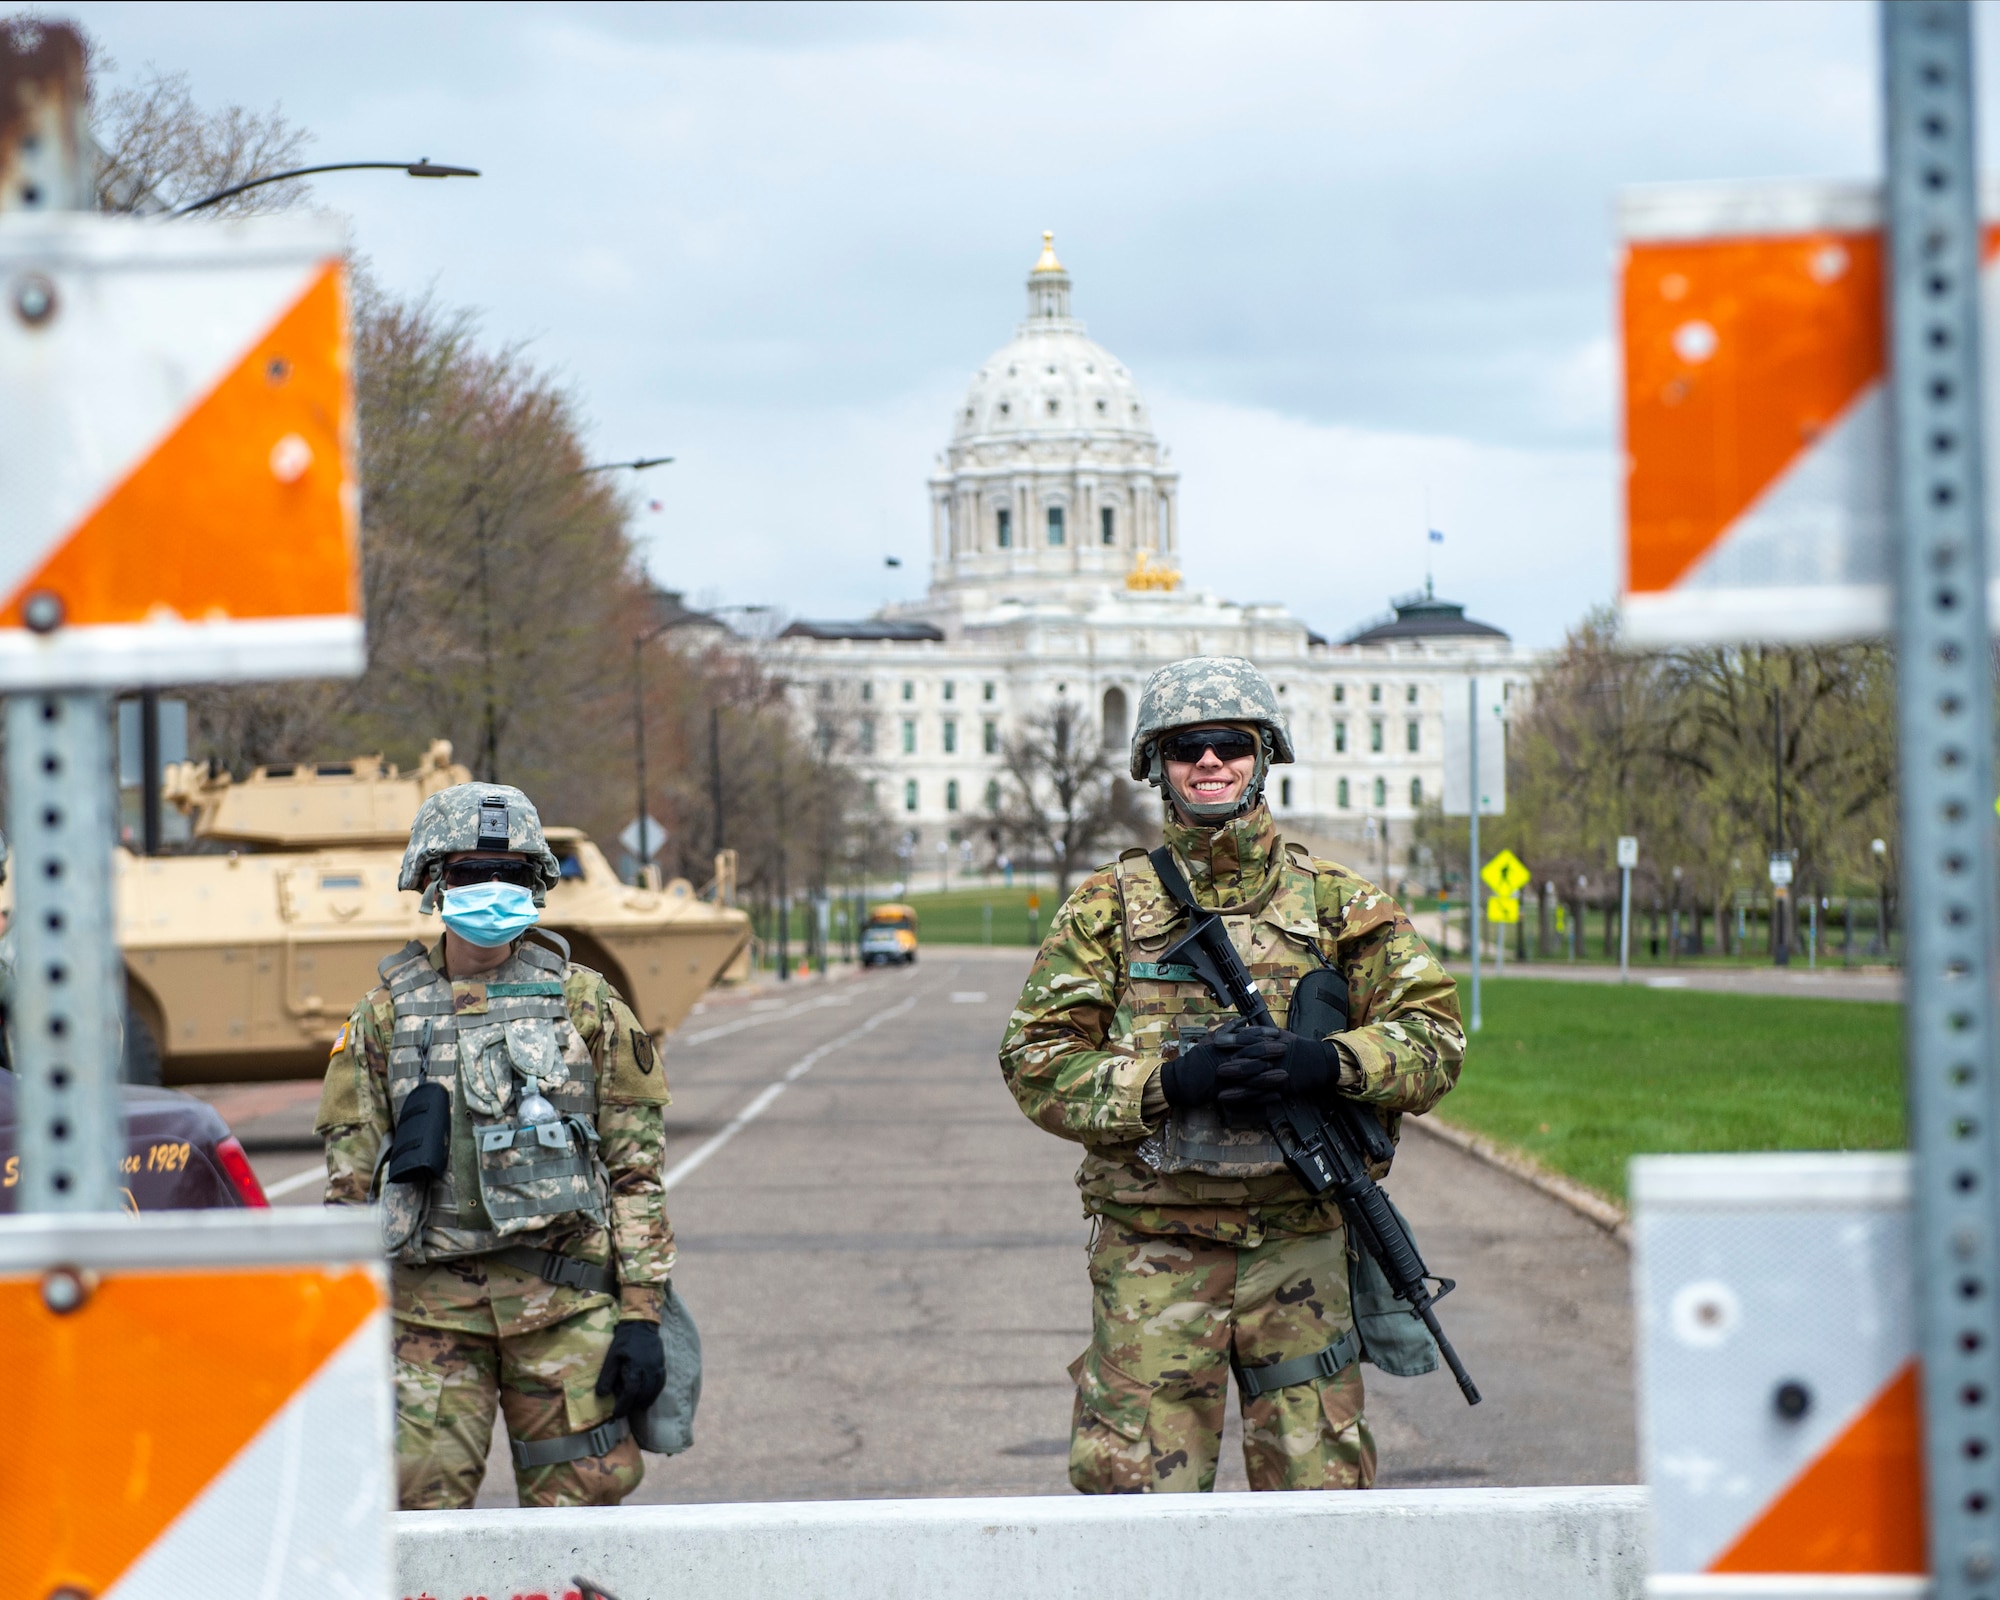 U.S. Air Force Airmen support security missions during Operation Safety Net in St. Paul, Minn., Apr. 20, 2021.